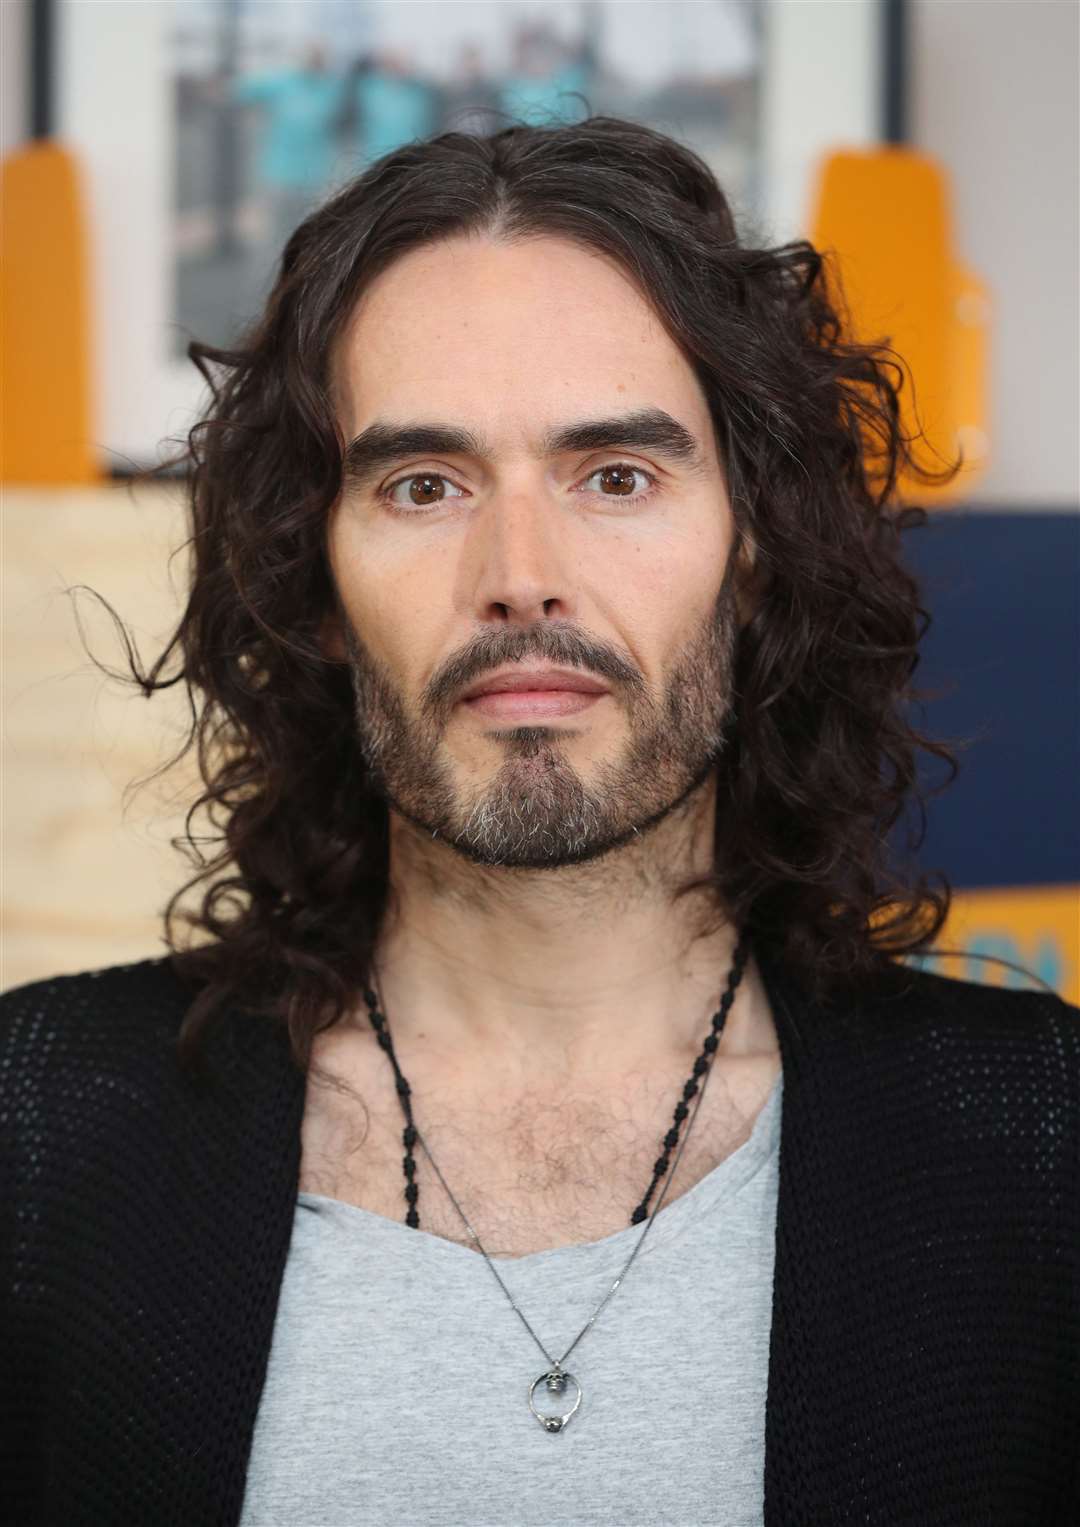 Russell Brand denies the allegations brought against him (Jonathan Brady/PA)